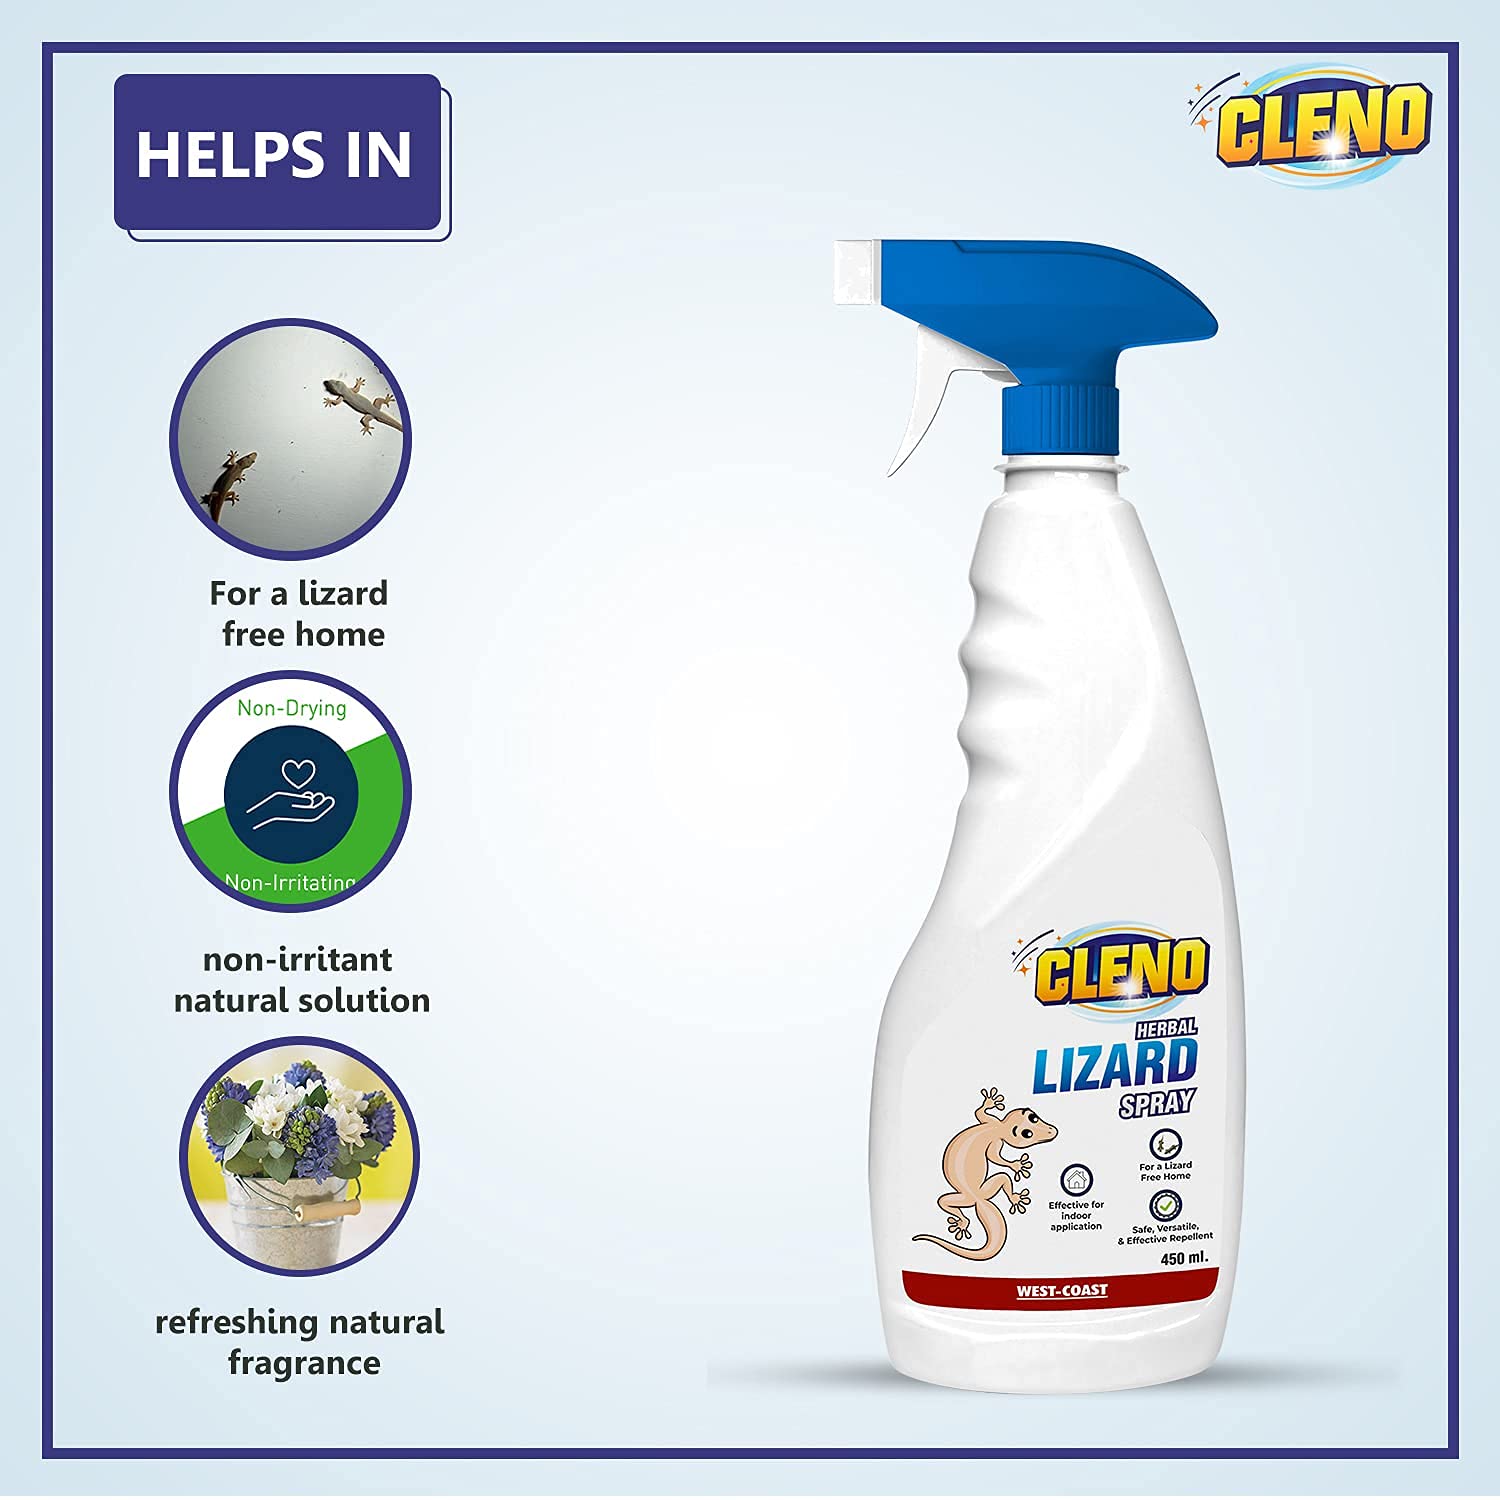 Cleno Herbal Lizard Repellent Spray - Completely Herbal - Made with Camphor, Lavender Oil & Eucalyptus Oil - Eco-friendly & Biodegradable - Chemical-Free -Baby-Safe, Skin-Safe ‚Äì 450ml (Ready to Use)